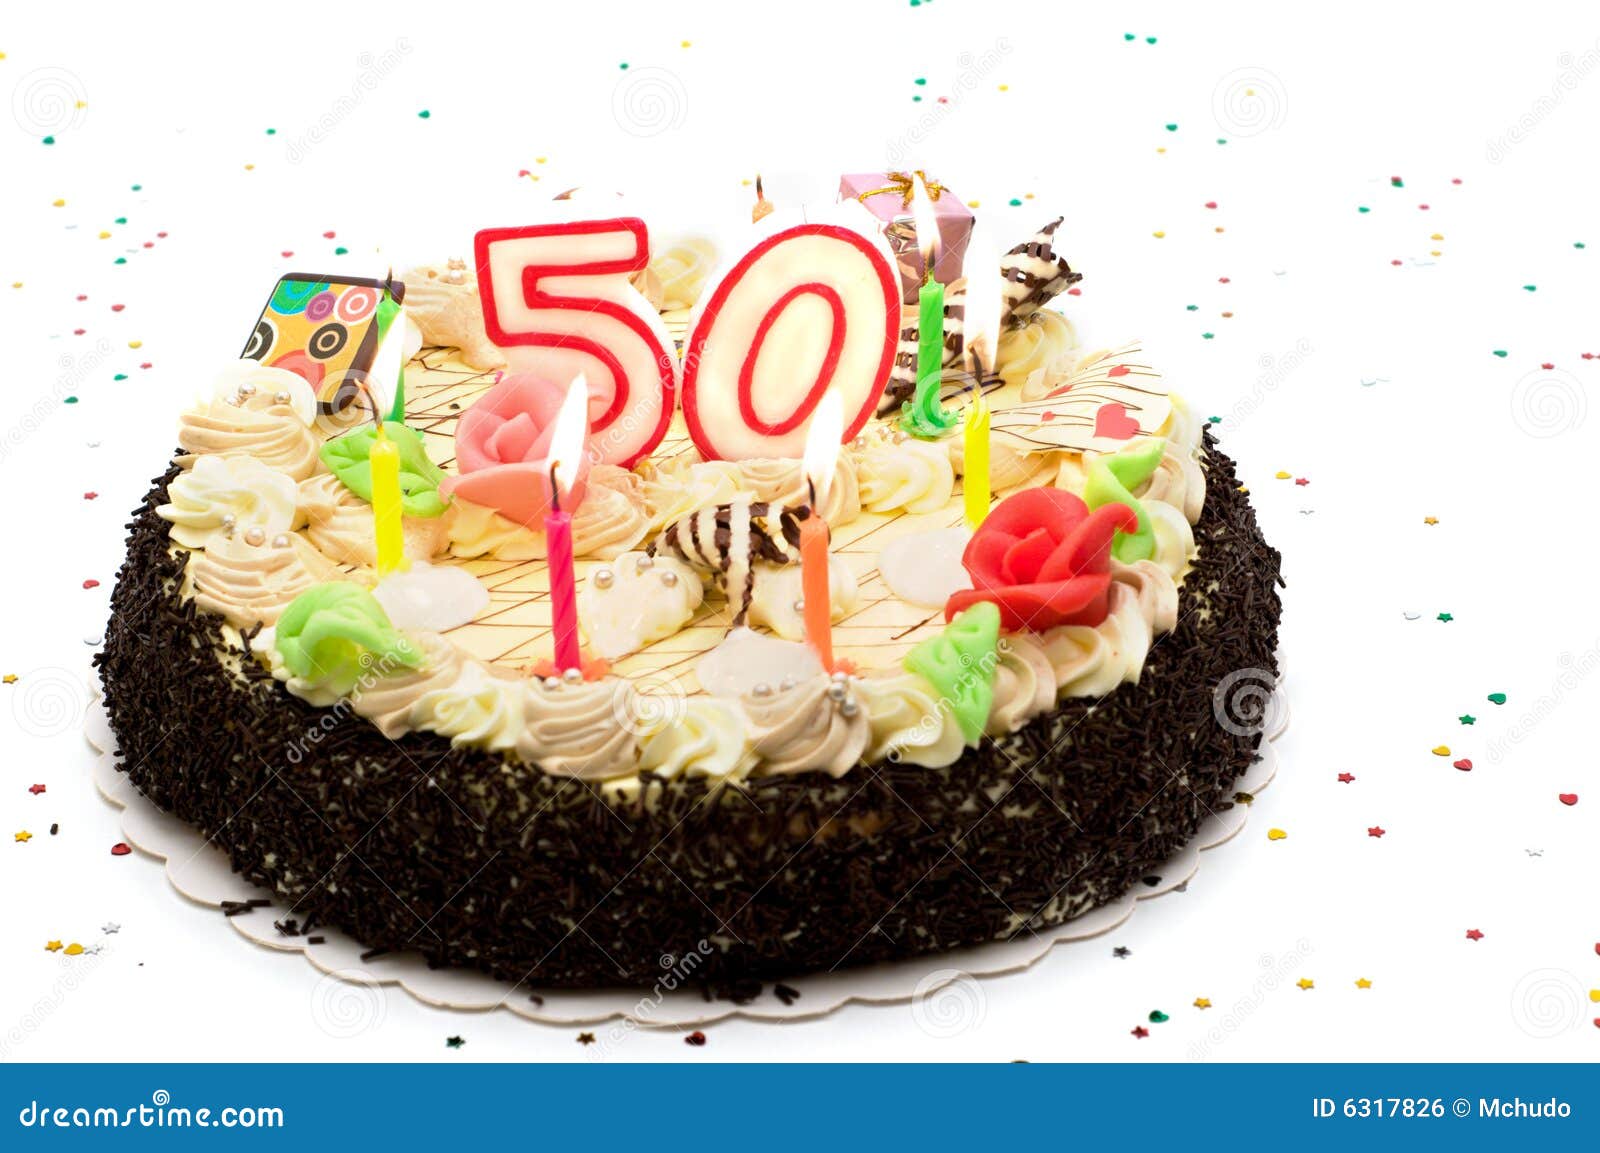 Birthday Cake For 50 Years Jubilee Royalty Free Stock Image  Image 